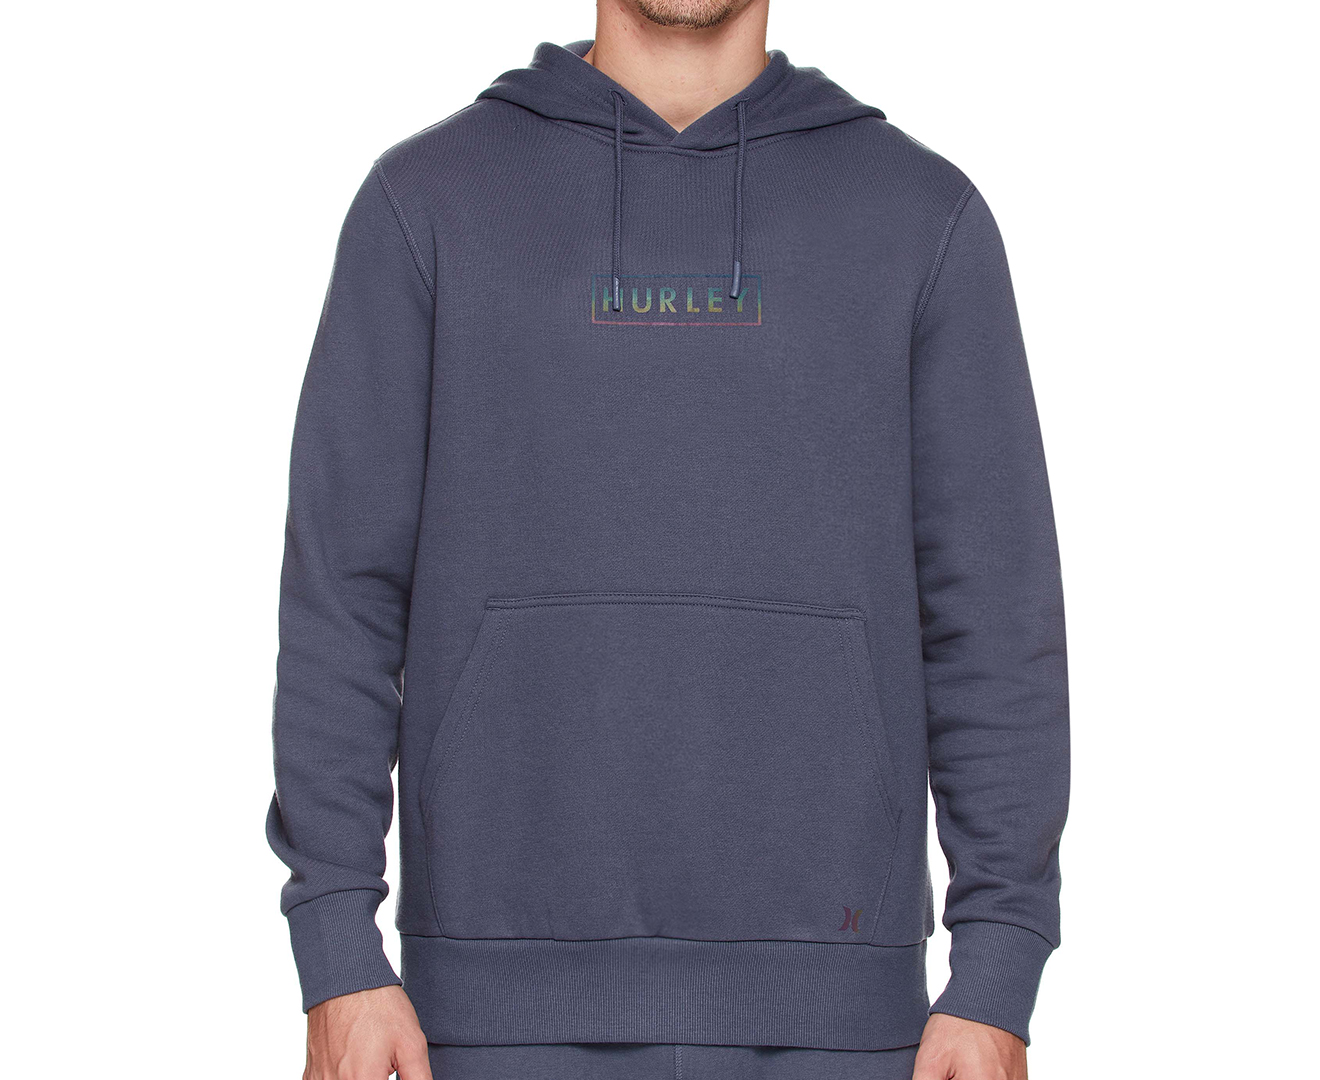 Hurley Men's Boxed Logo Fleece Pullover Hoodie, Diffused Blue